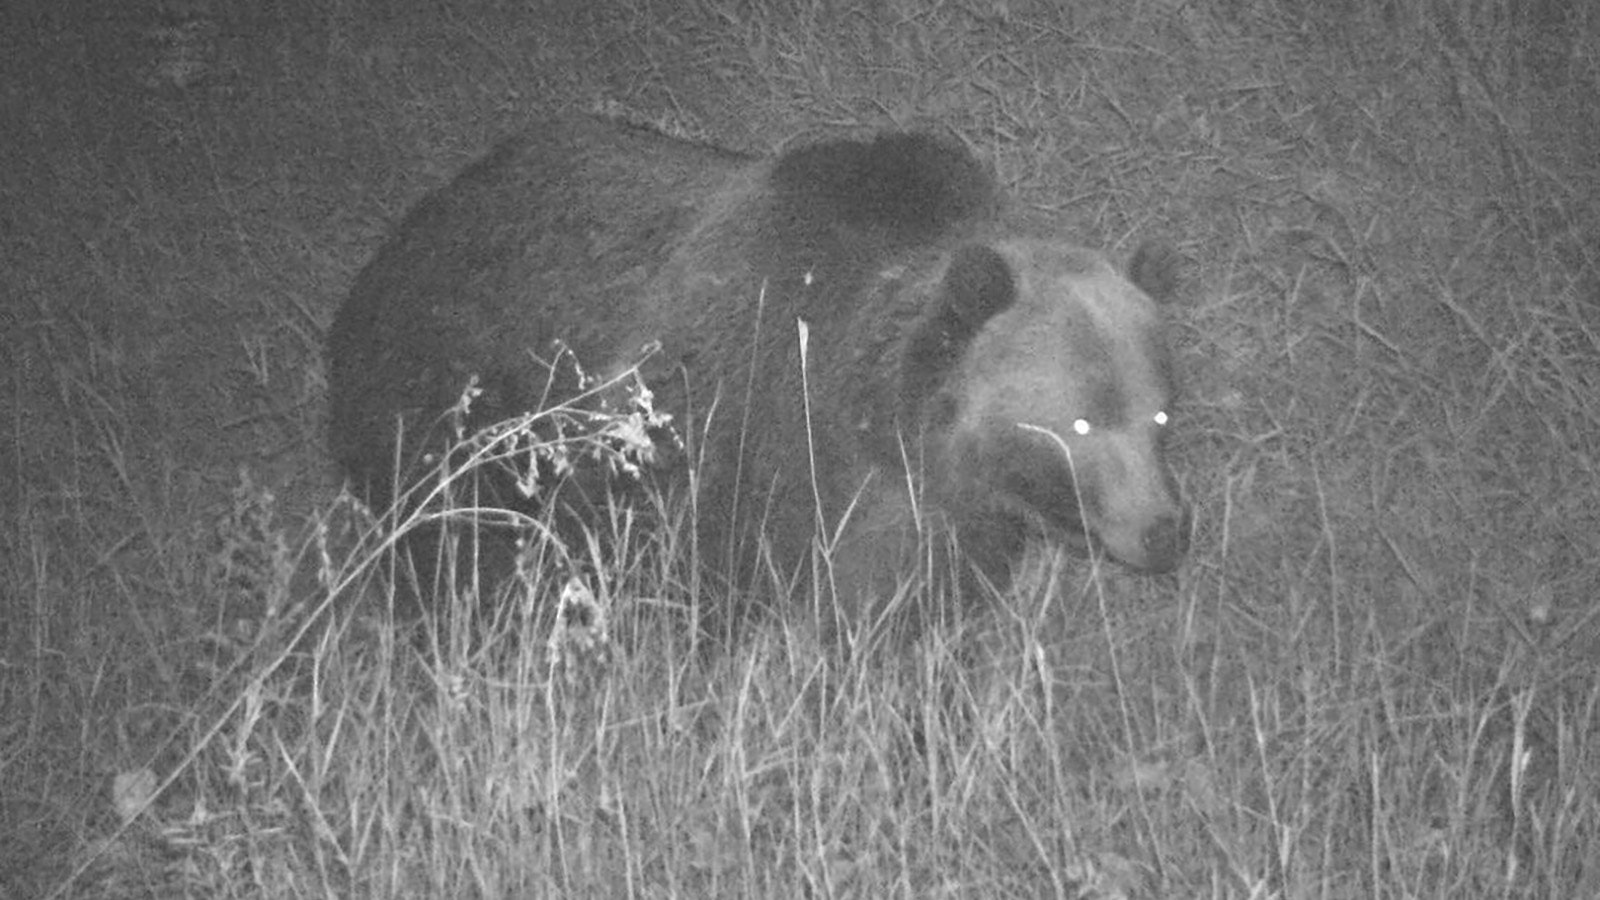 This grizzly bear was captured on an American Prairie trail cam in the Missouri Breaks region of Montana.